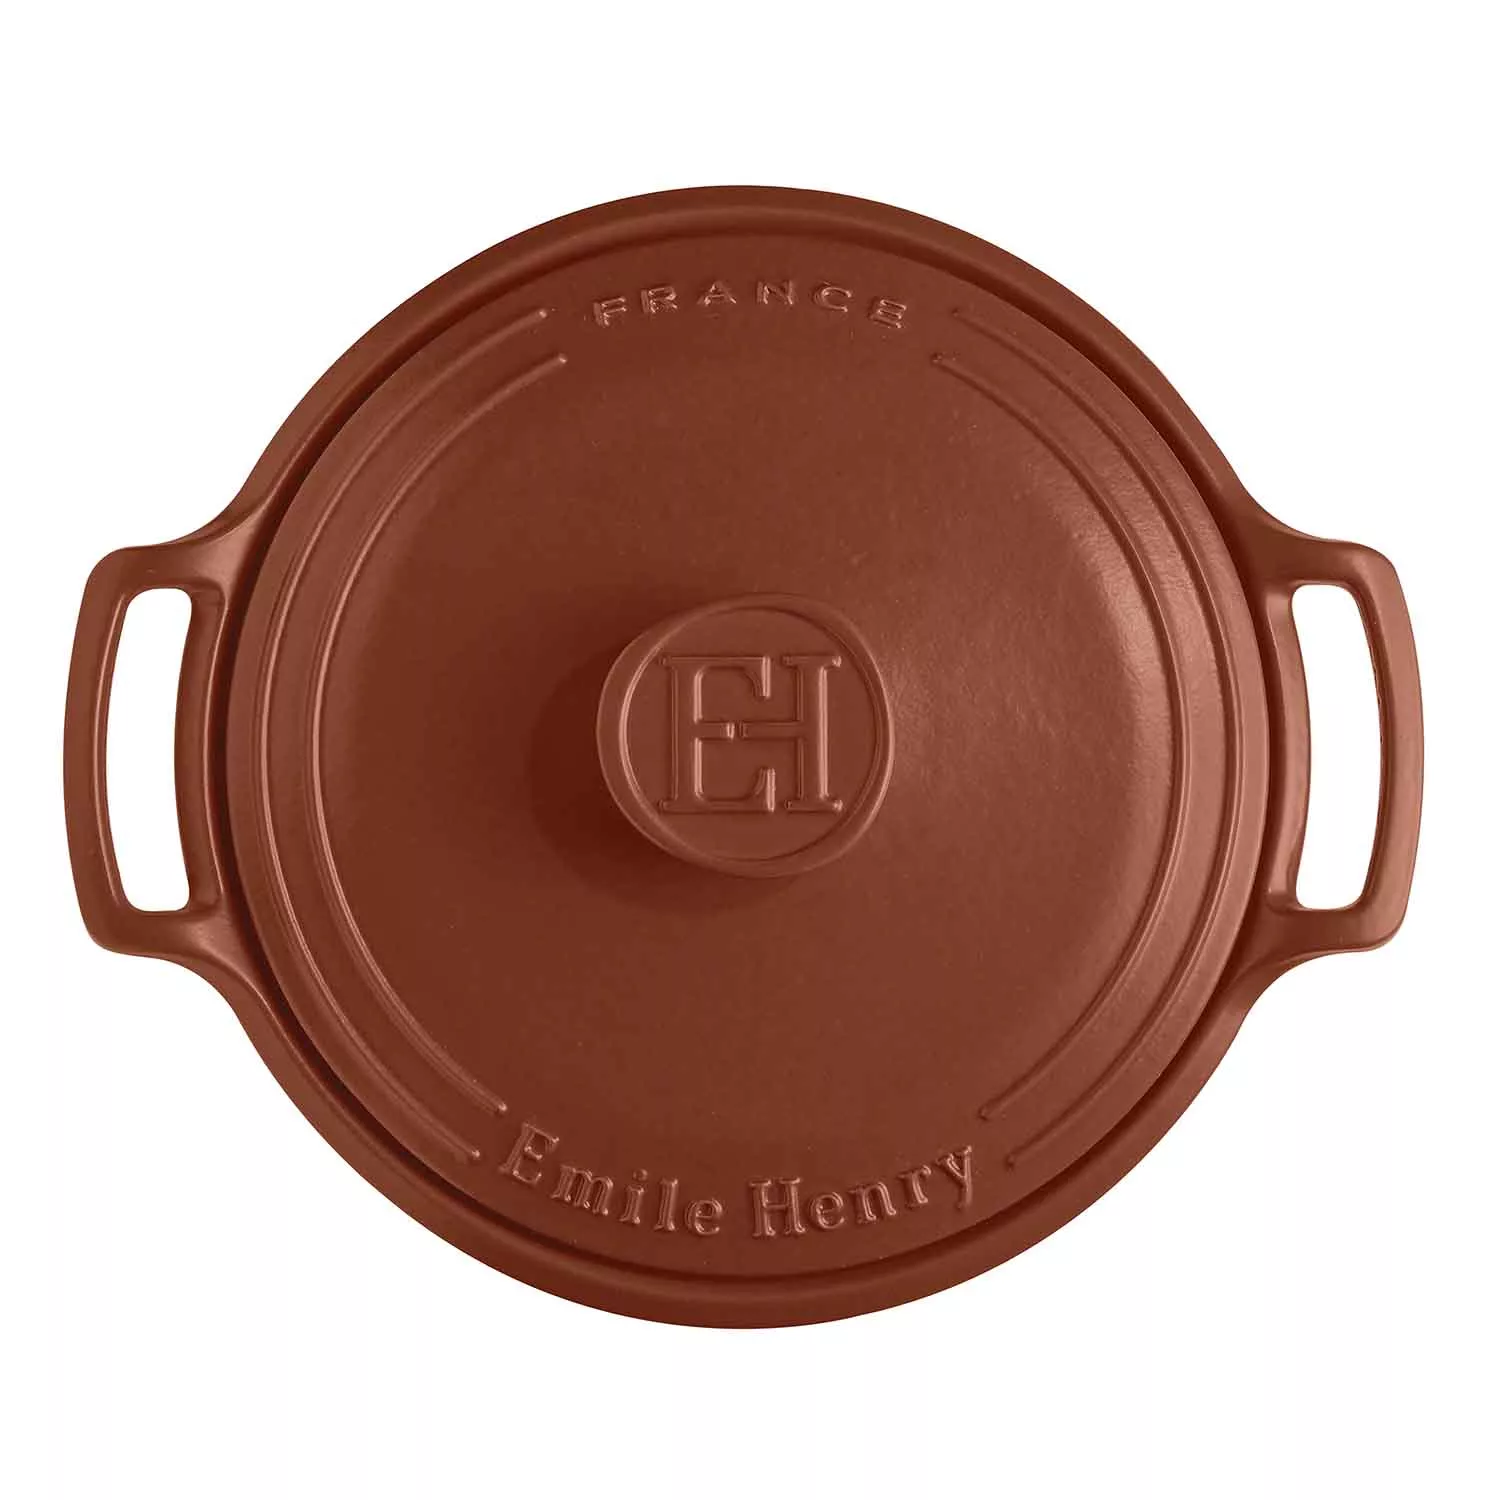 EMILE HENRY flame Dutch Oven, French Ceramic Casserole Pot, Oven